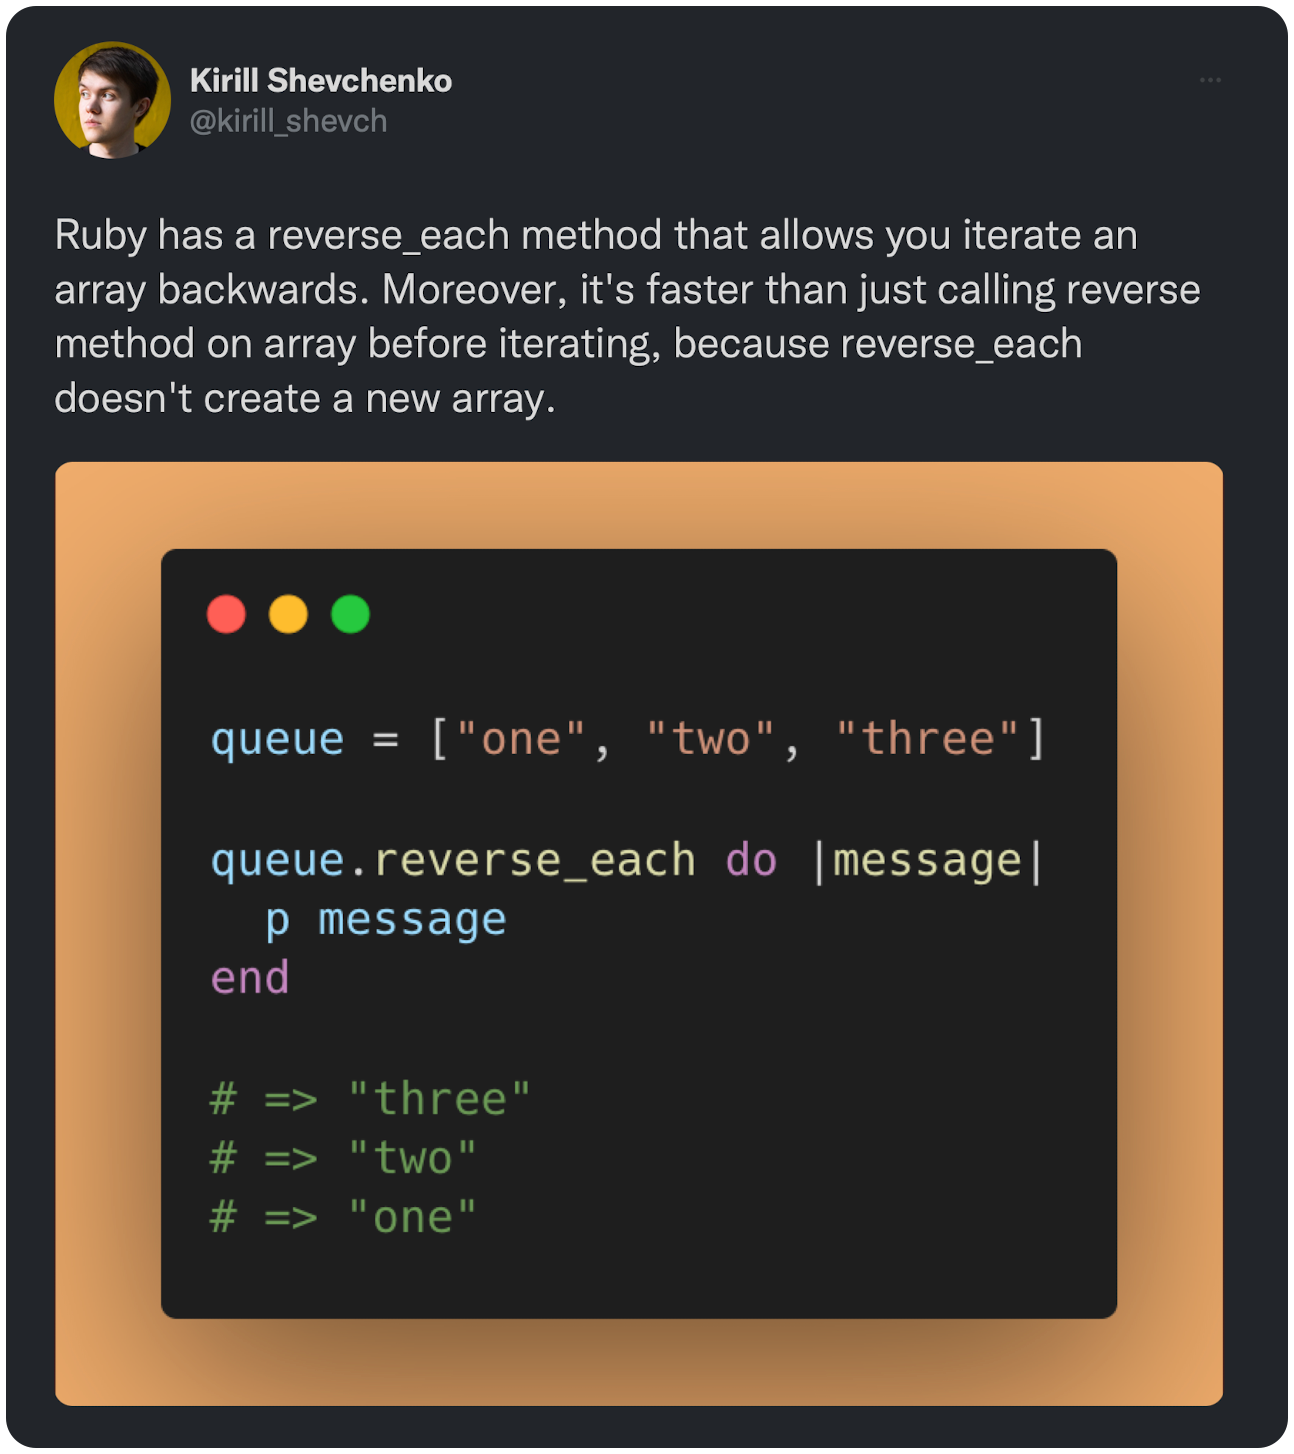 Ruby has a reverse_each method that allows you iterate an array backwards. Moreover, it's faster than just calling reverse method on array before iterating, because reverse_each doesn't create a new array.